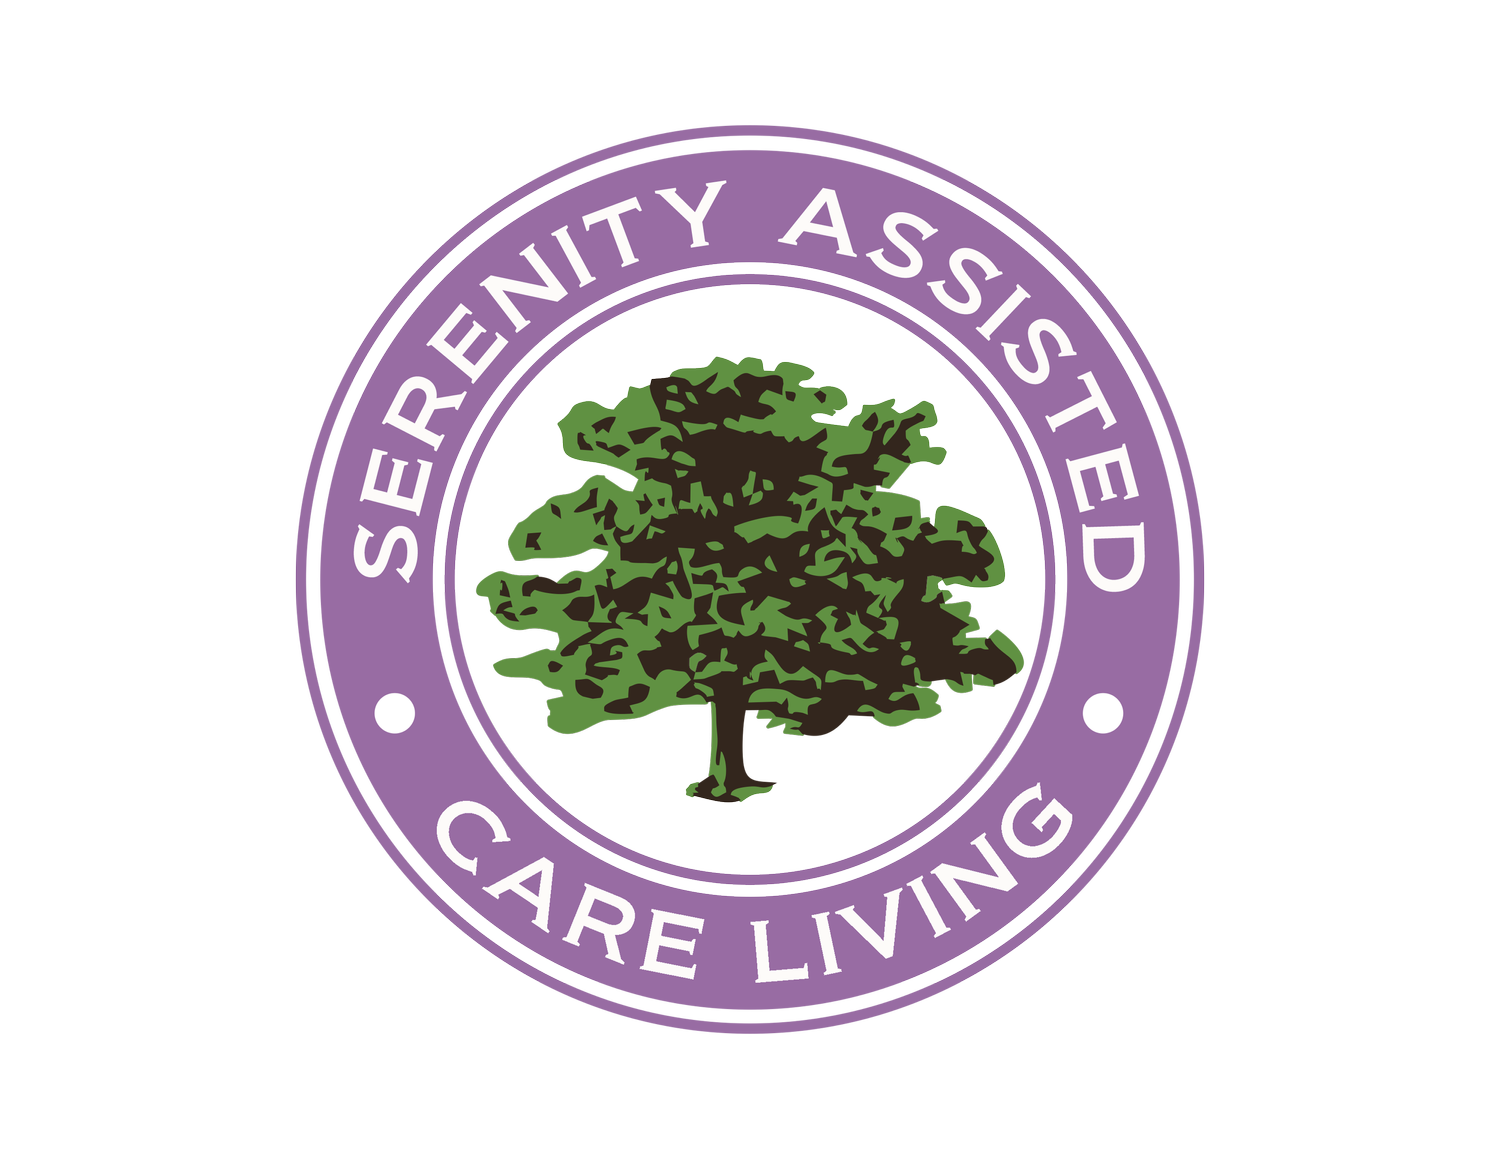 Serenity Assisted Care Living